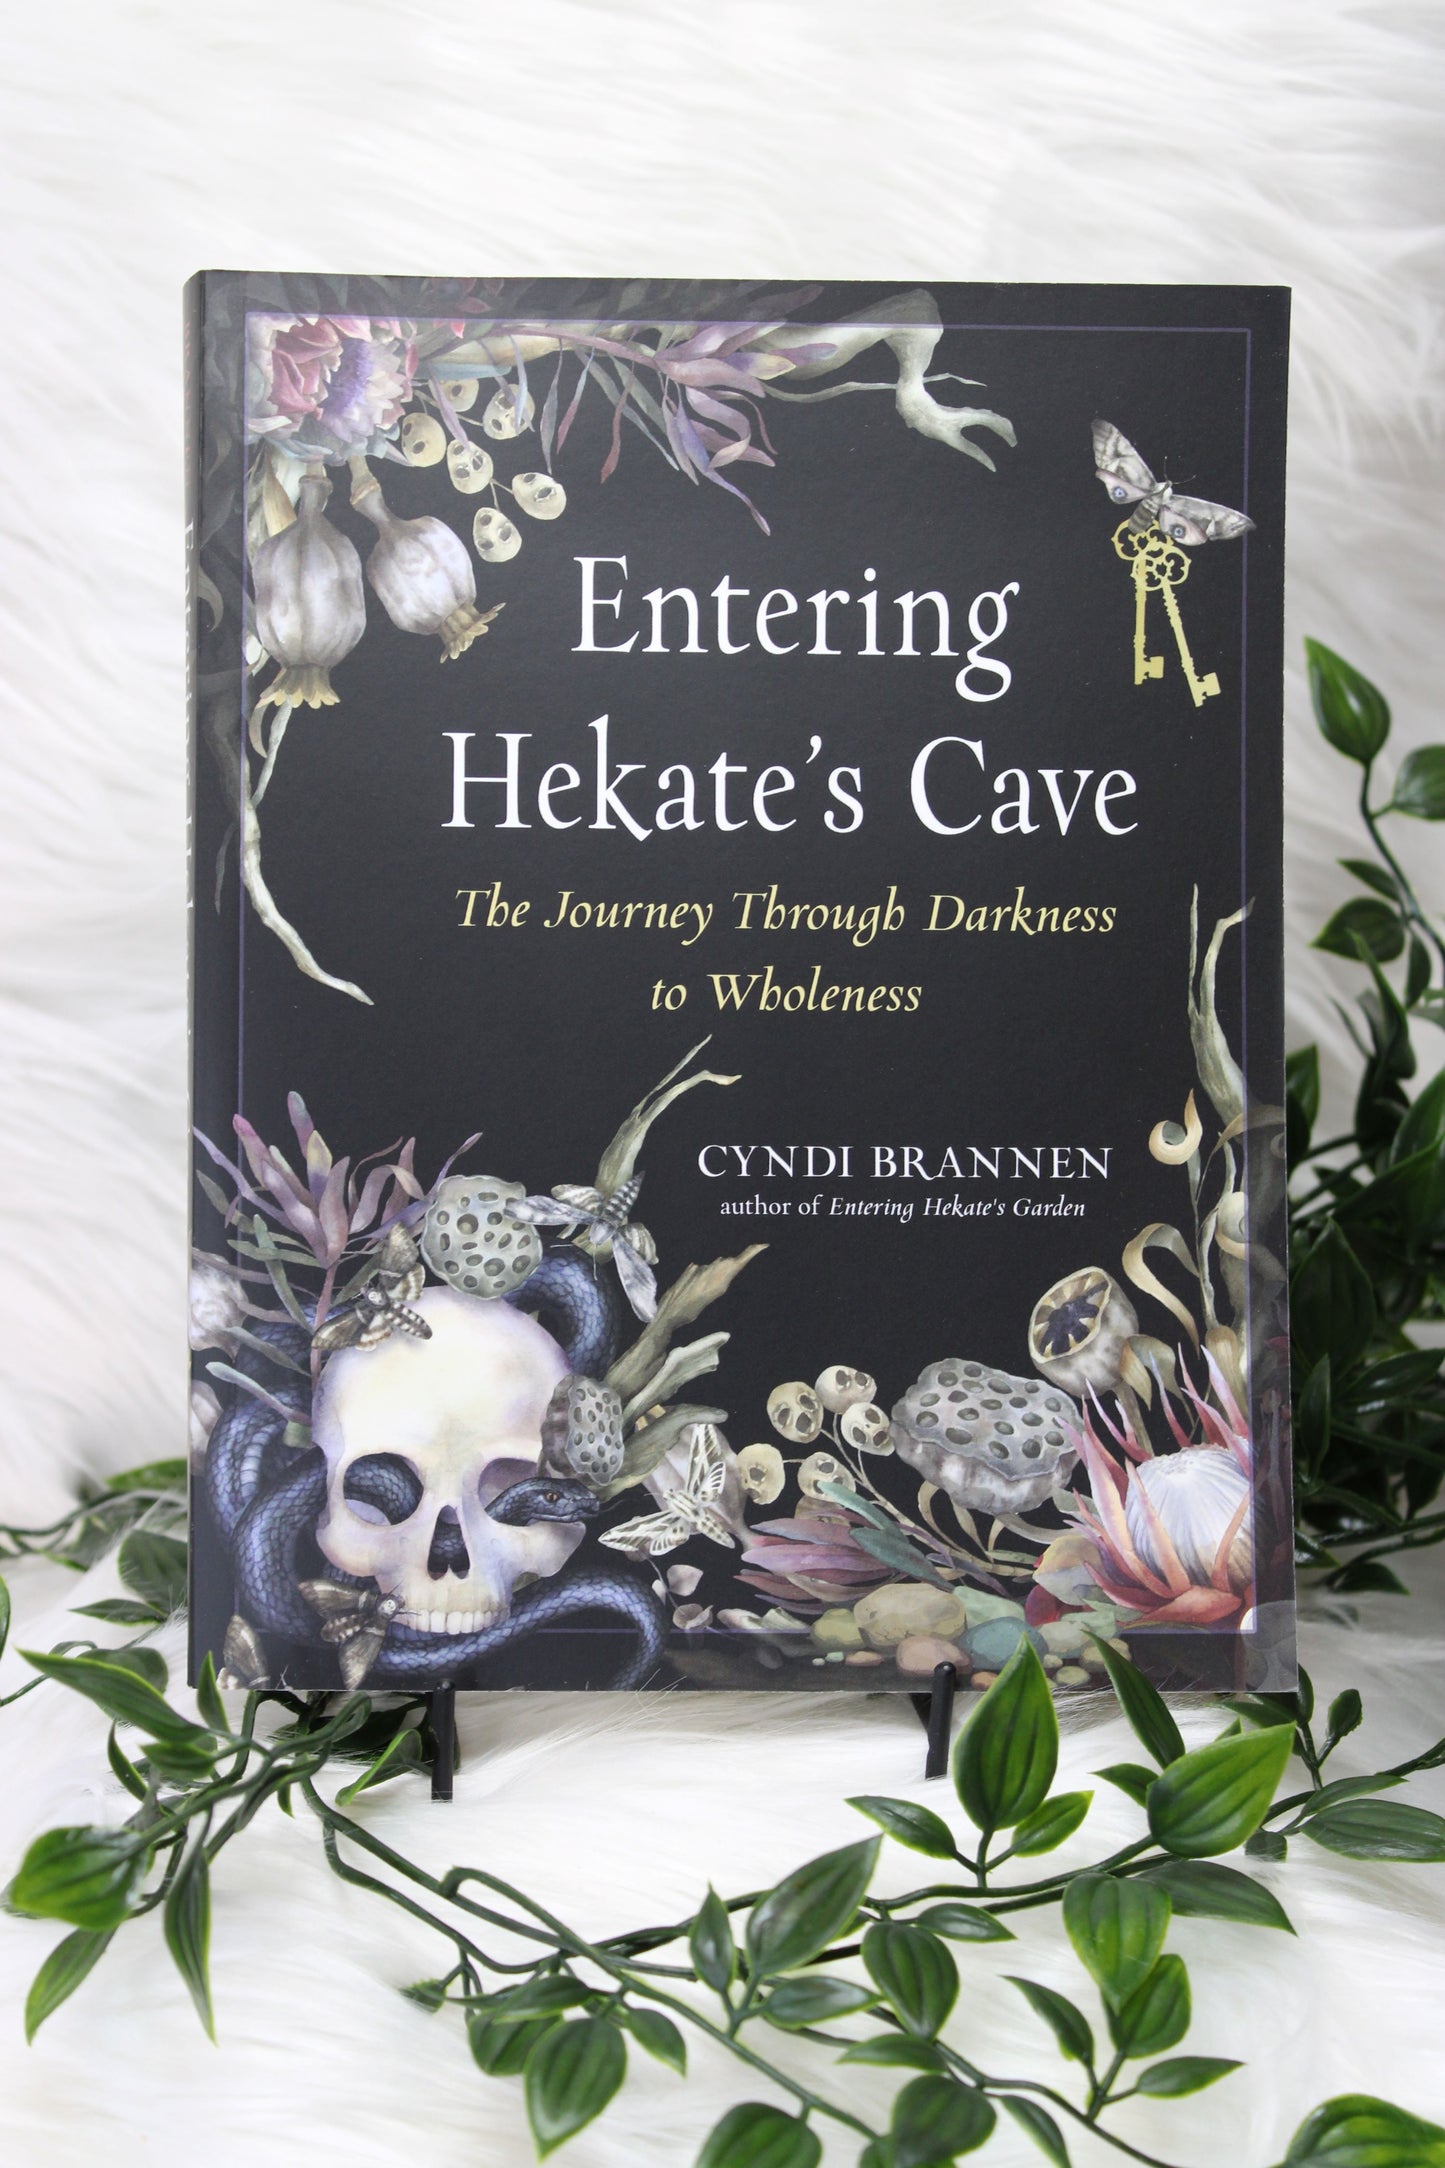 ENTERING HEKATE’S CAVE